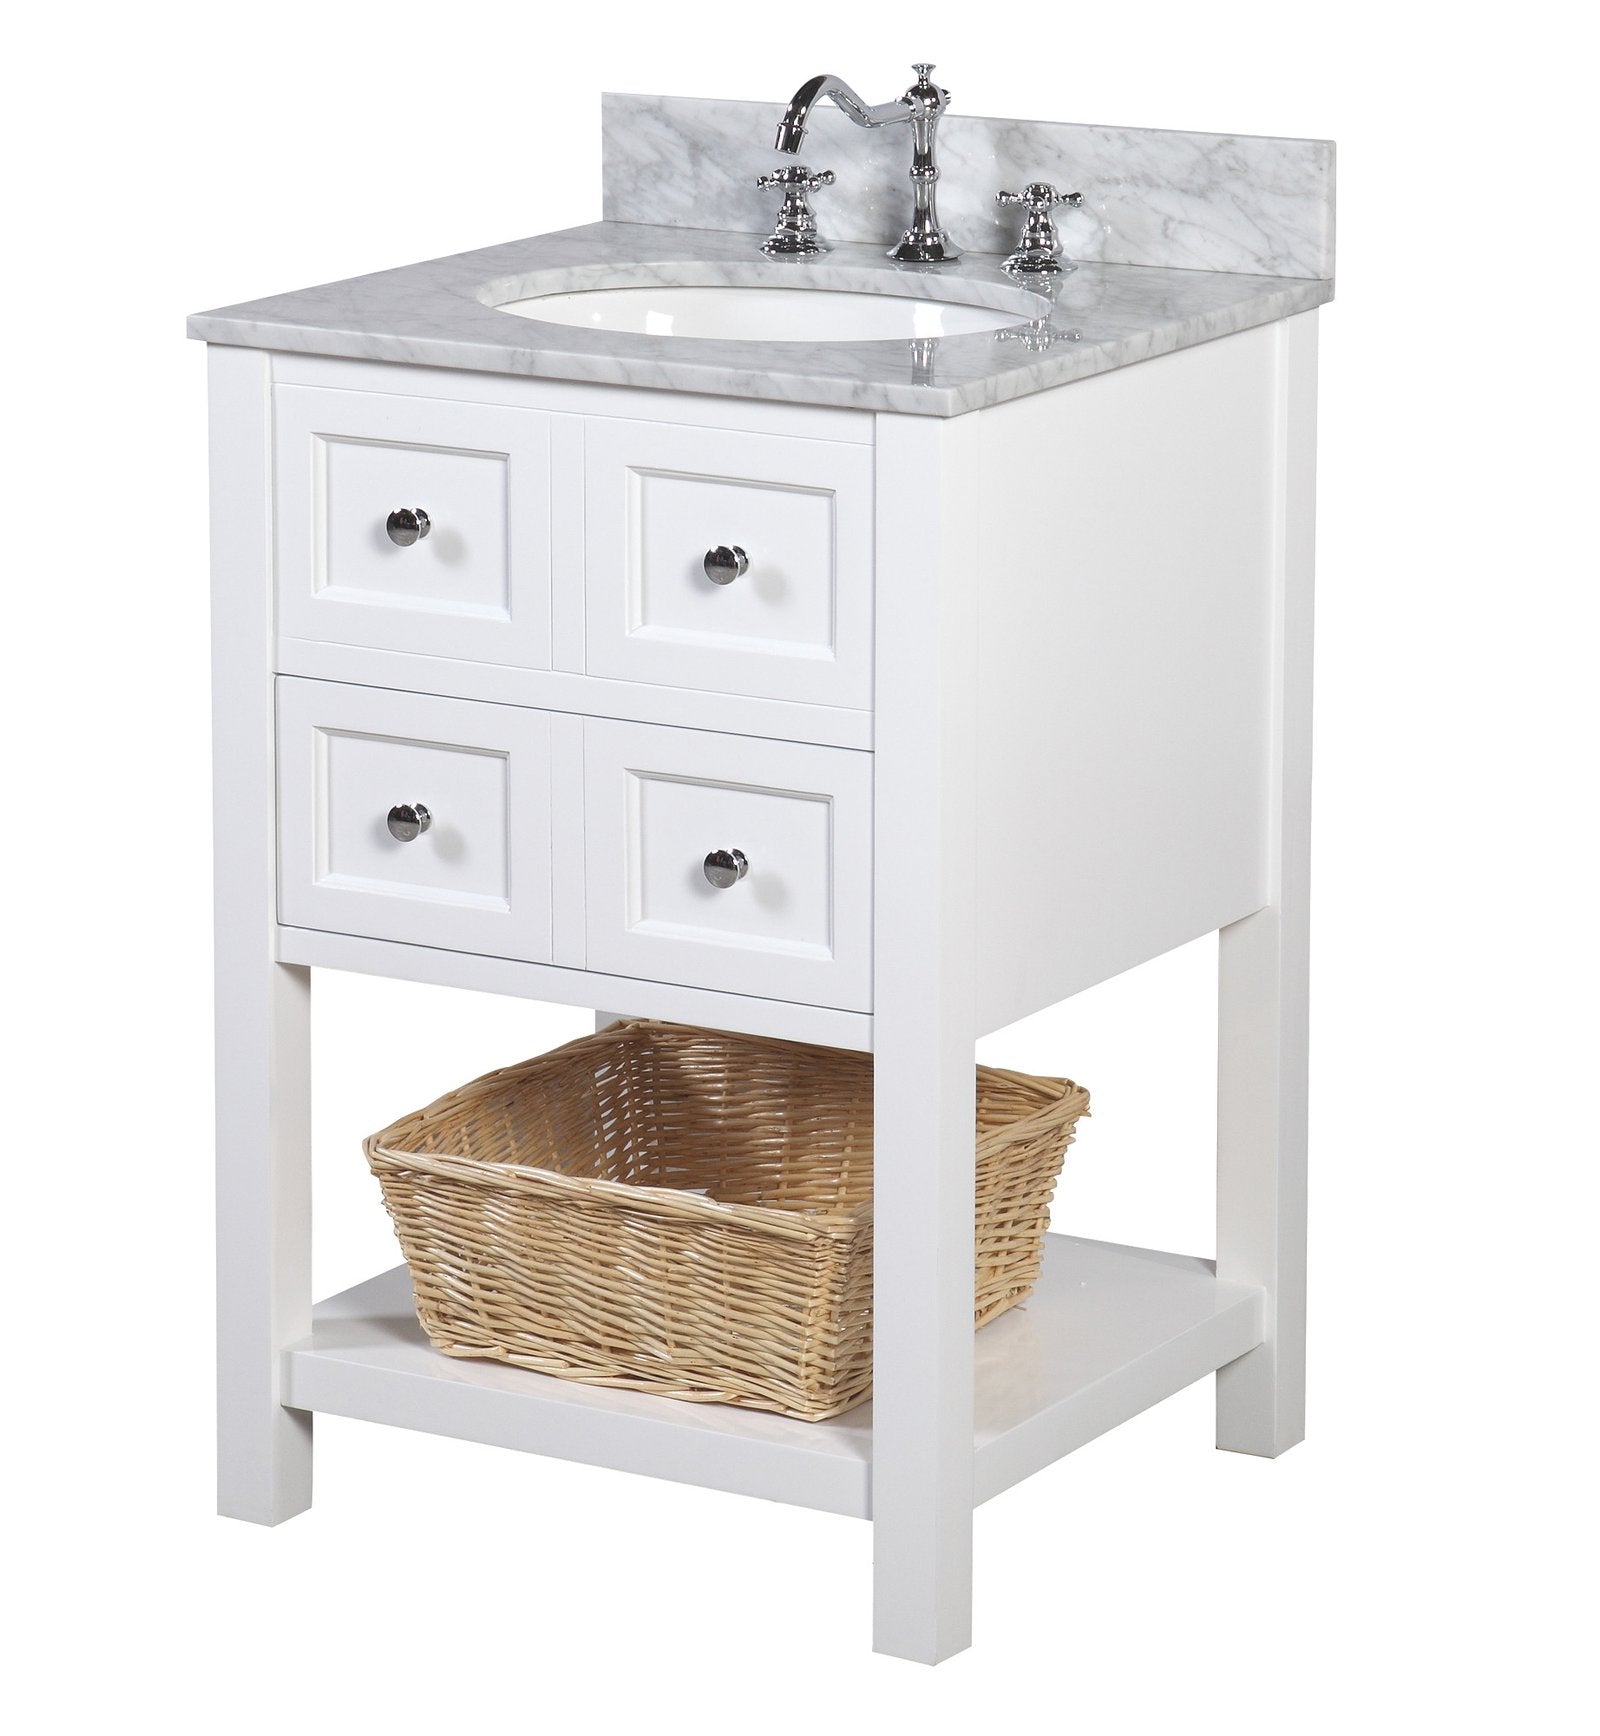 New Yorker 24 Modern Bathroom Vanity With Carrara Marble Top Kitchenbathcollection